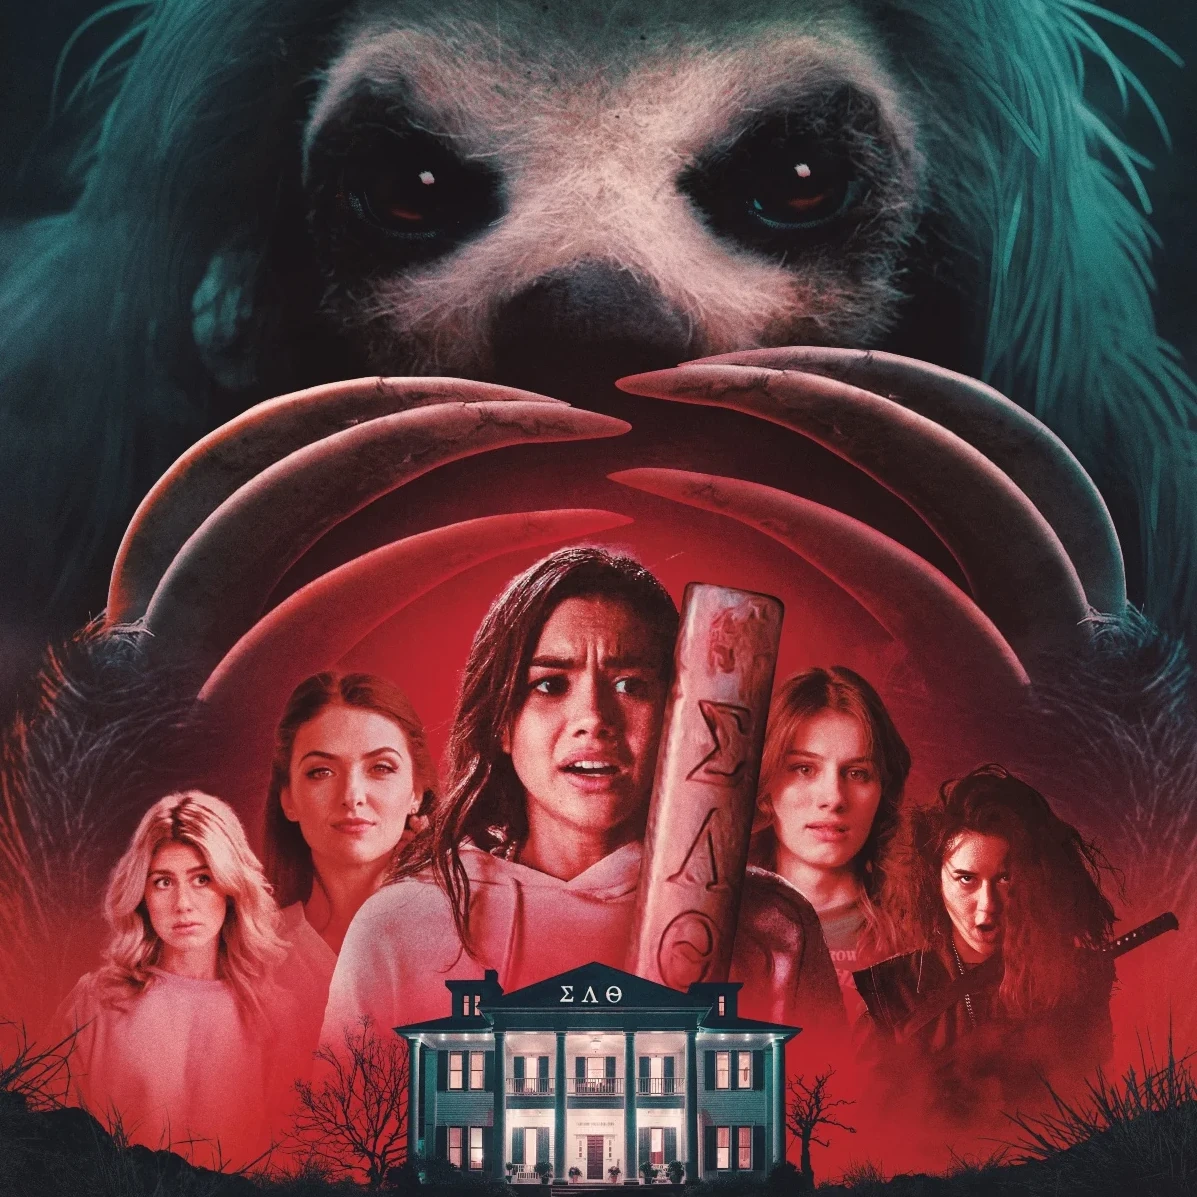 Dont rush, die slow. Slotherhouse, a PG13 horror flick where a sloth murders sorority girls, is a fantastic example of a so-bad-its-good horror B-movie. While not perfect by design, this campy throwback stands out among a market dripping with elevated horror.